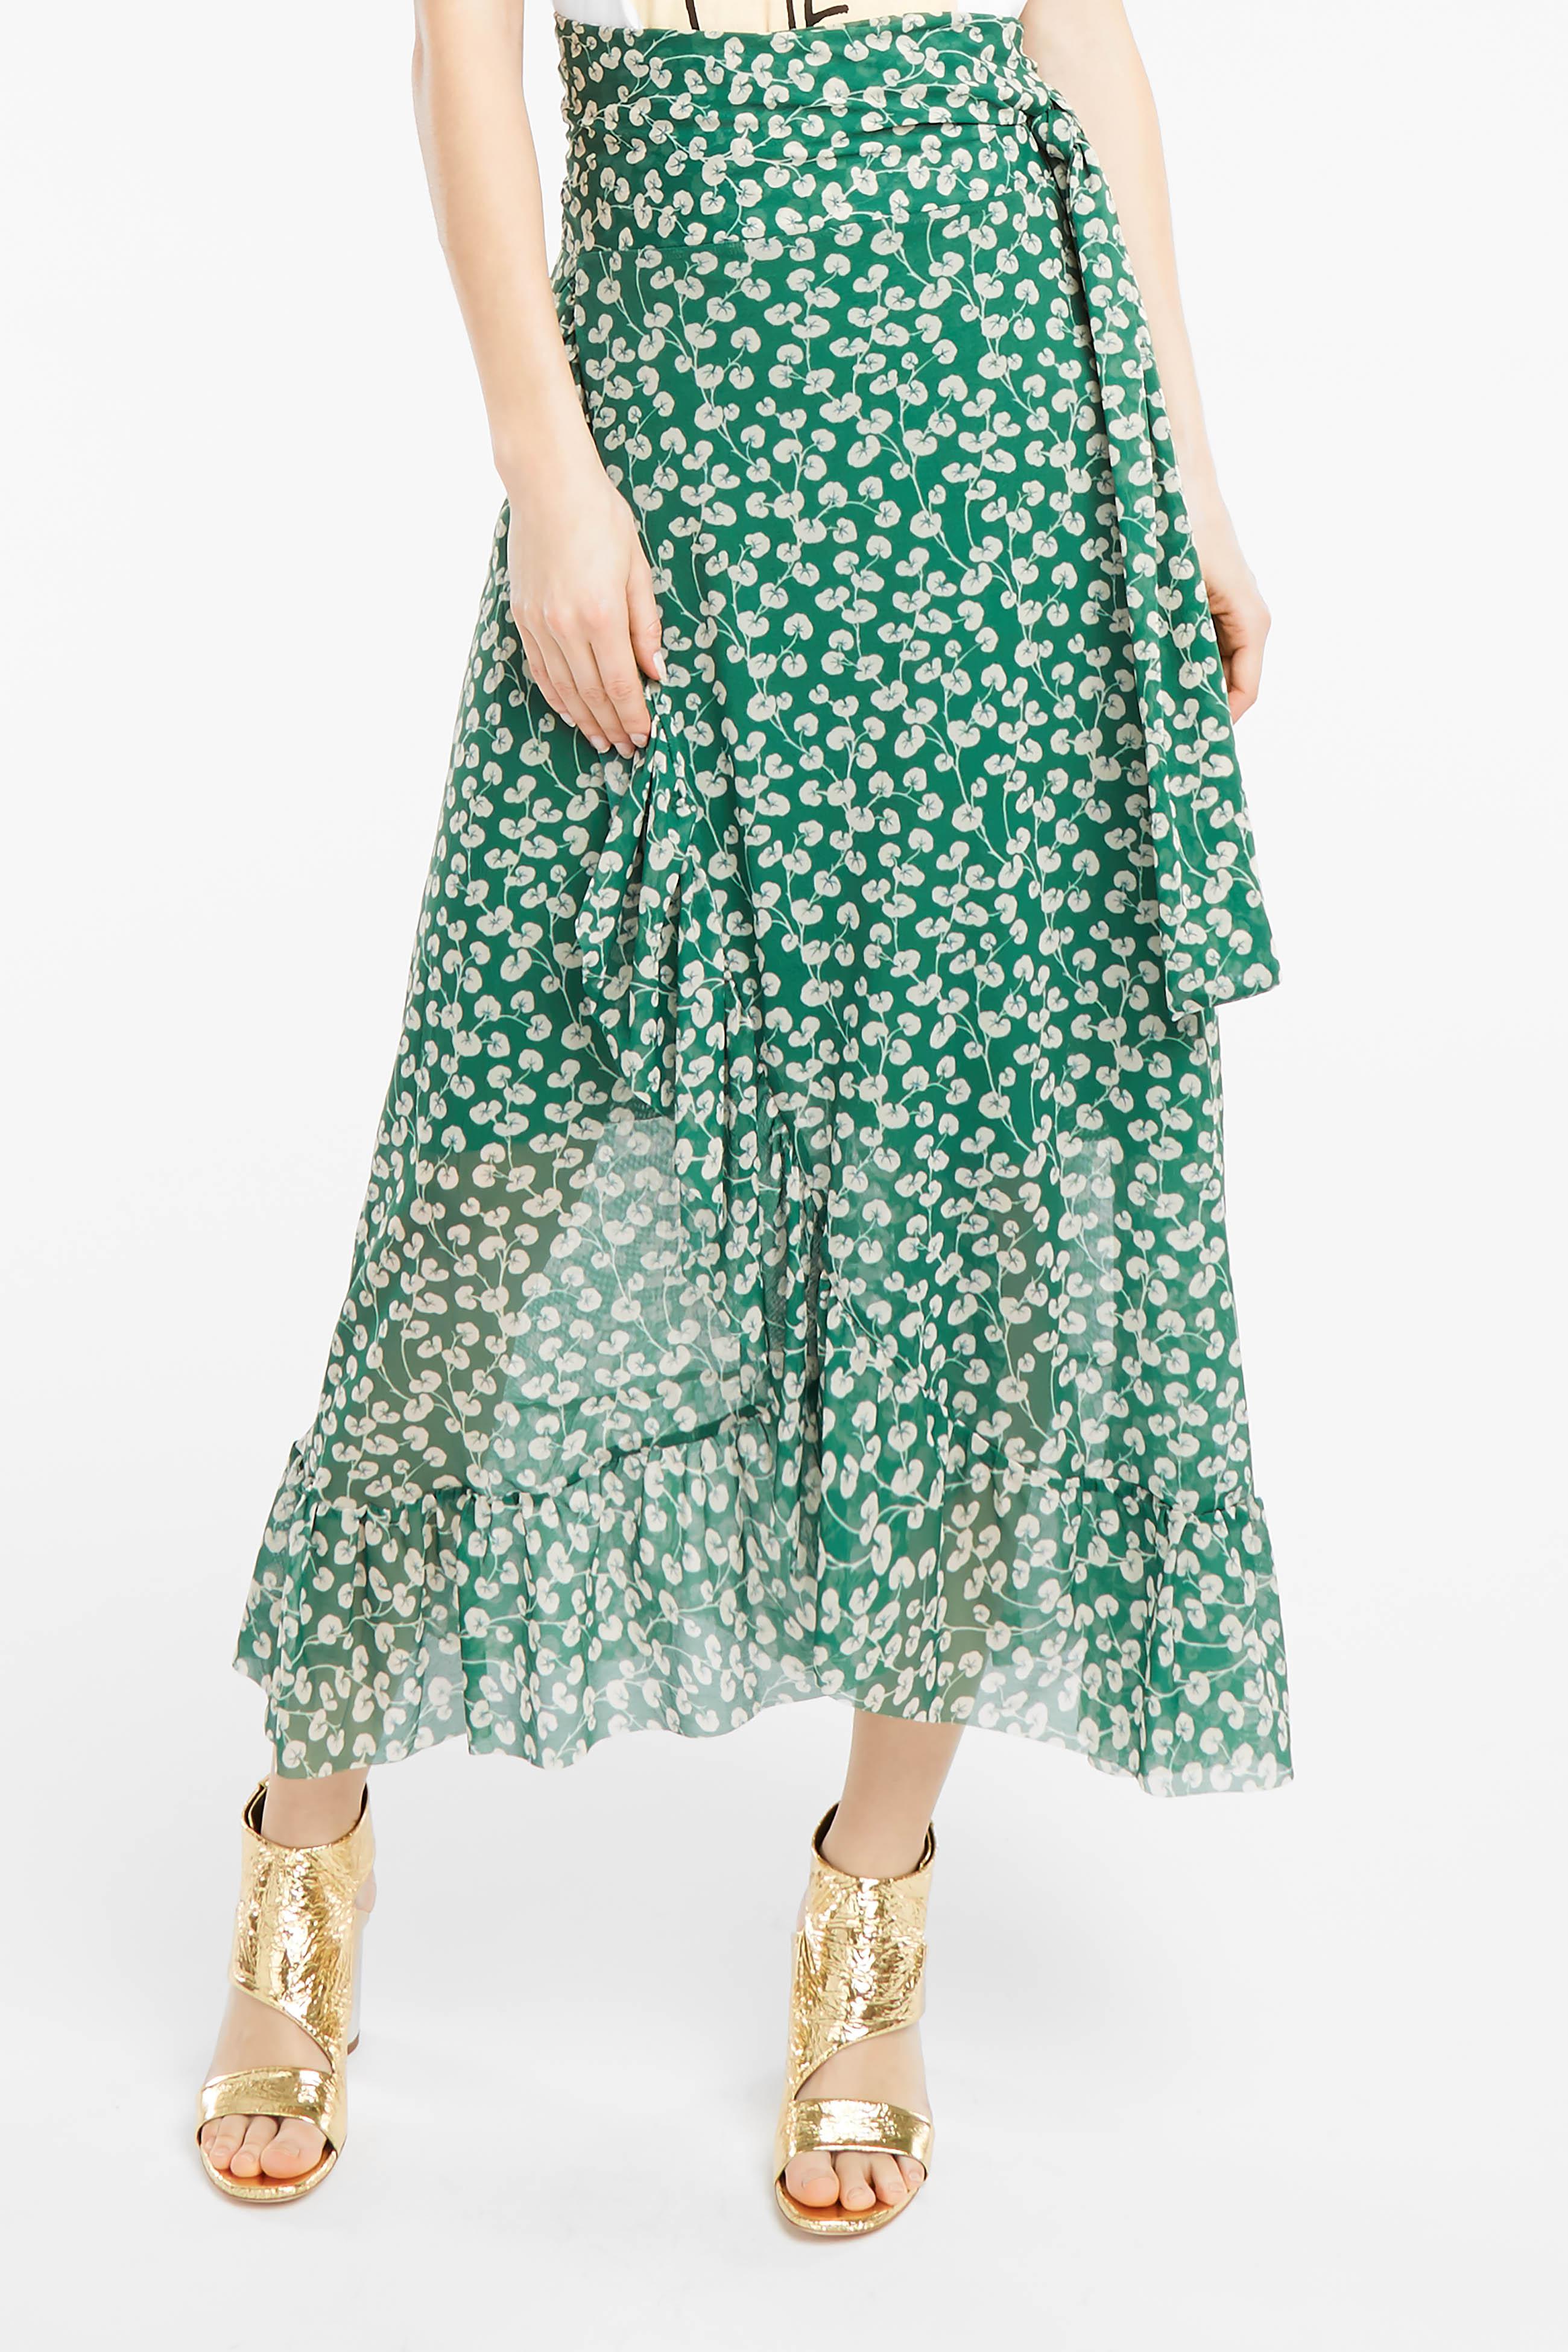 Ganni Synthetic Capella Mesh Skirt in Green - Lyst